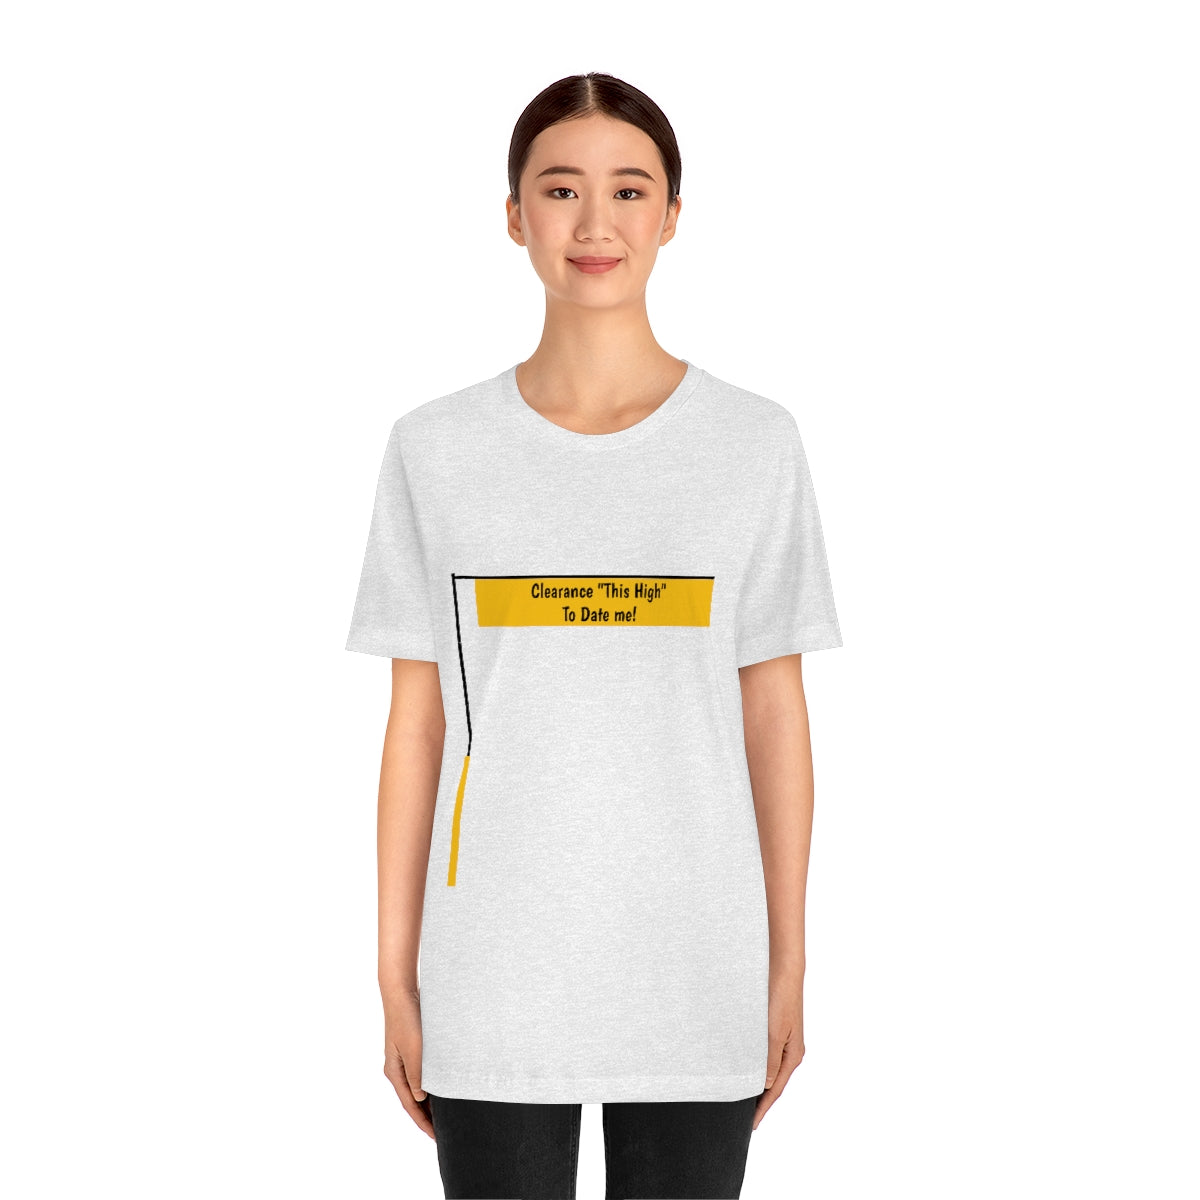 Funny - Clearance Must be "This High" to Date me - Unisex Short Sleeve Tee